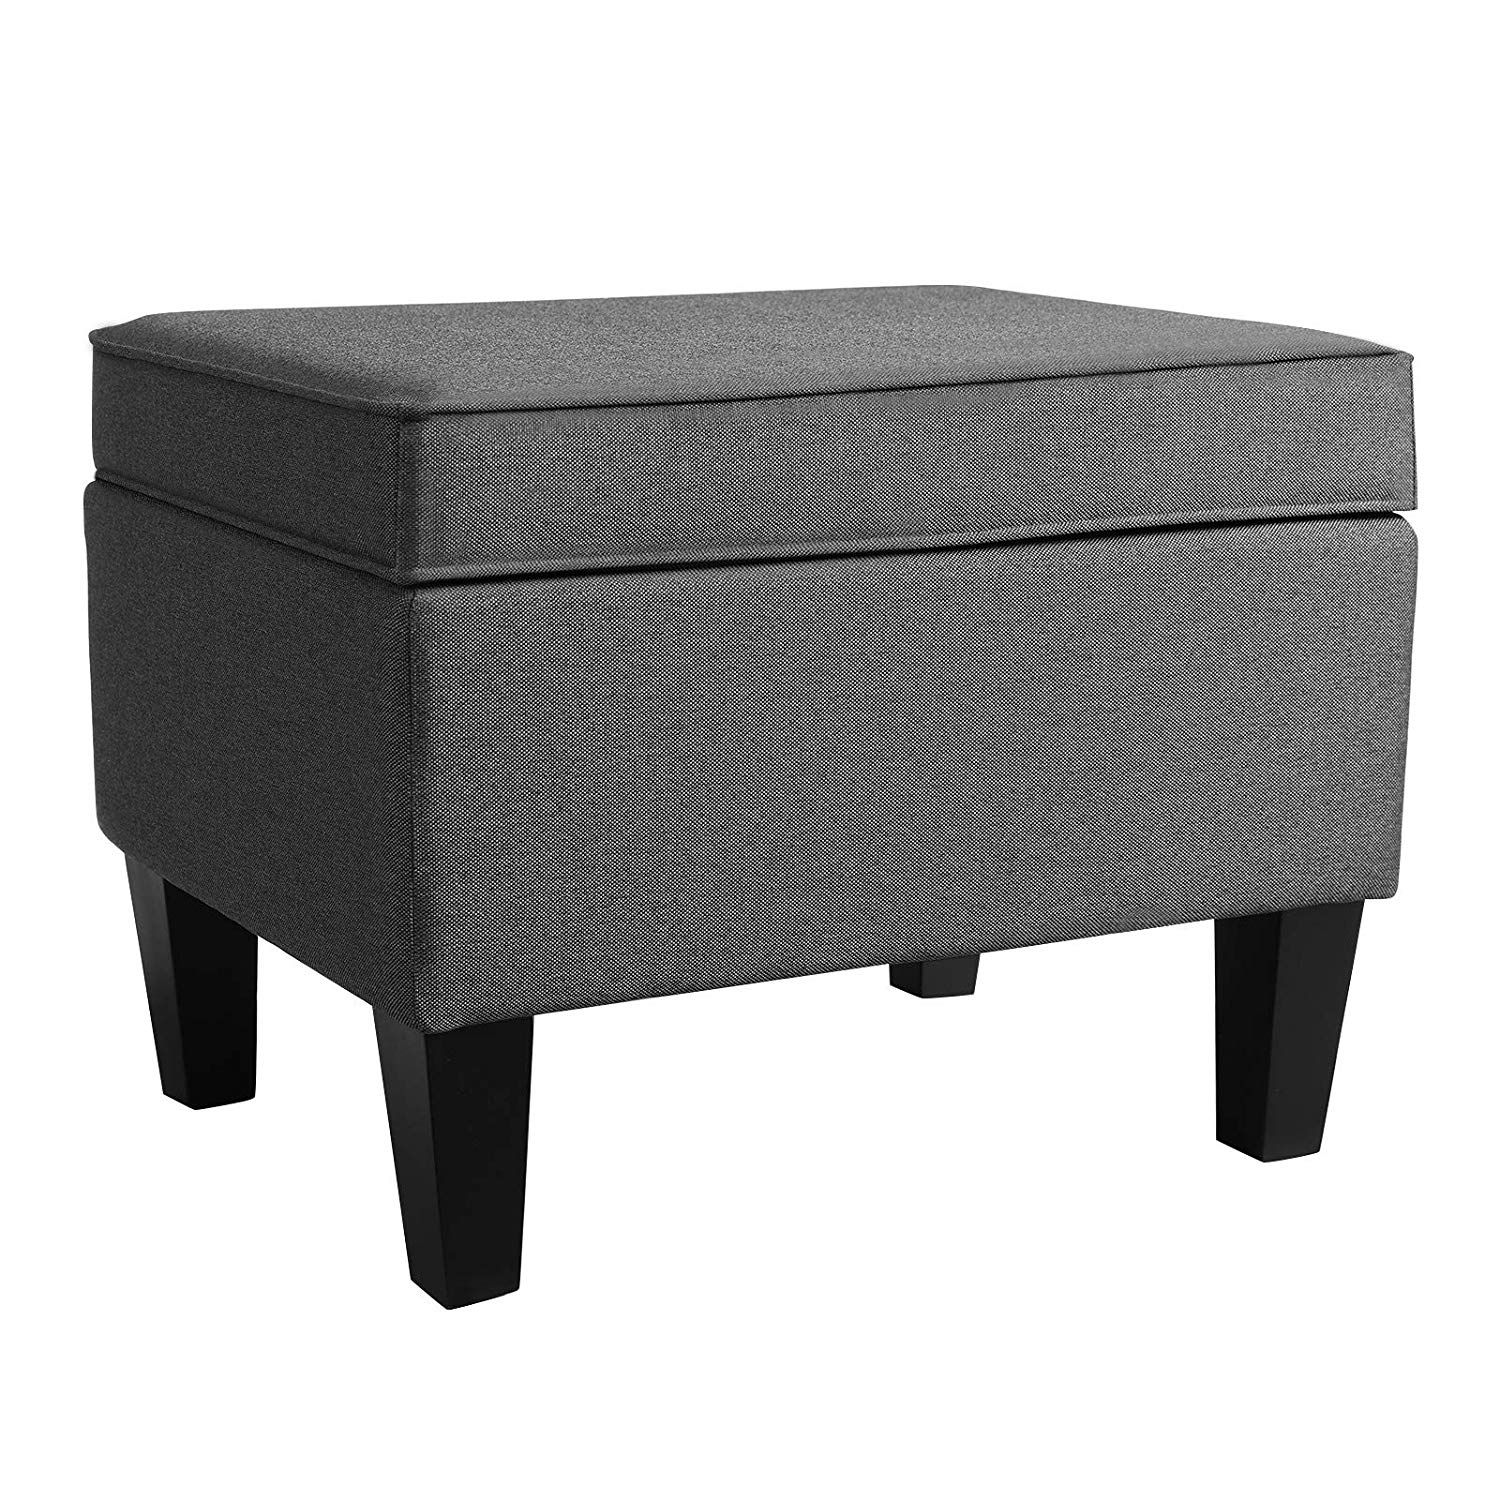 Rectangular Fabric Upholstered Wooden Frame Storage Ottoman, Gray Throughout Gray Fabric Oval Ottomans (View 20 of 20)